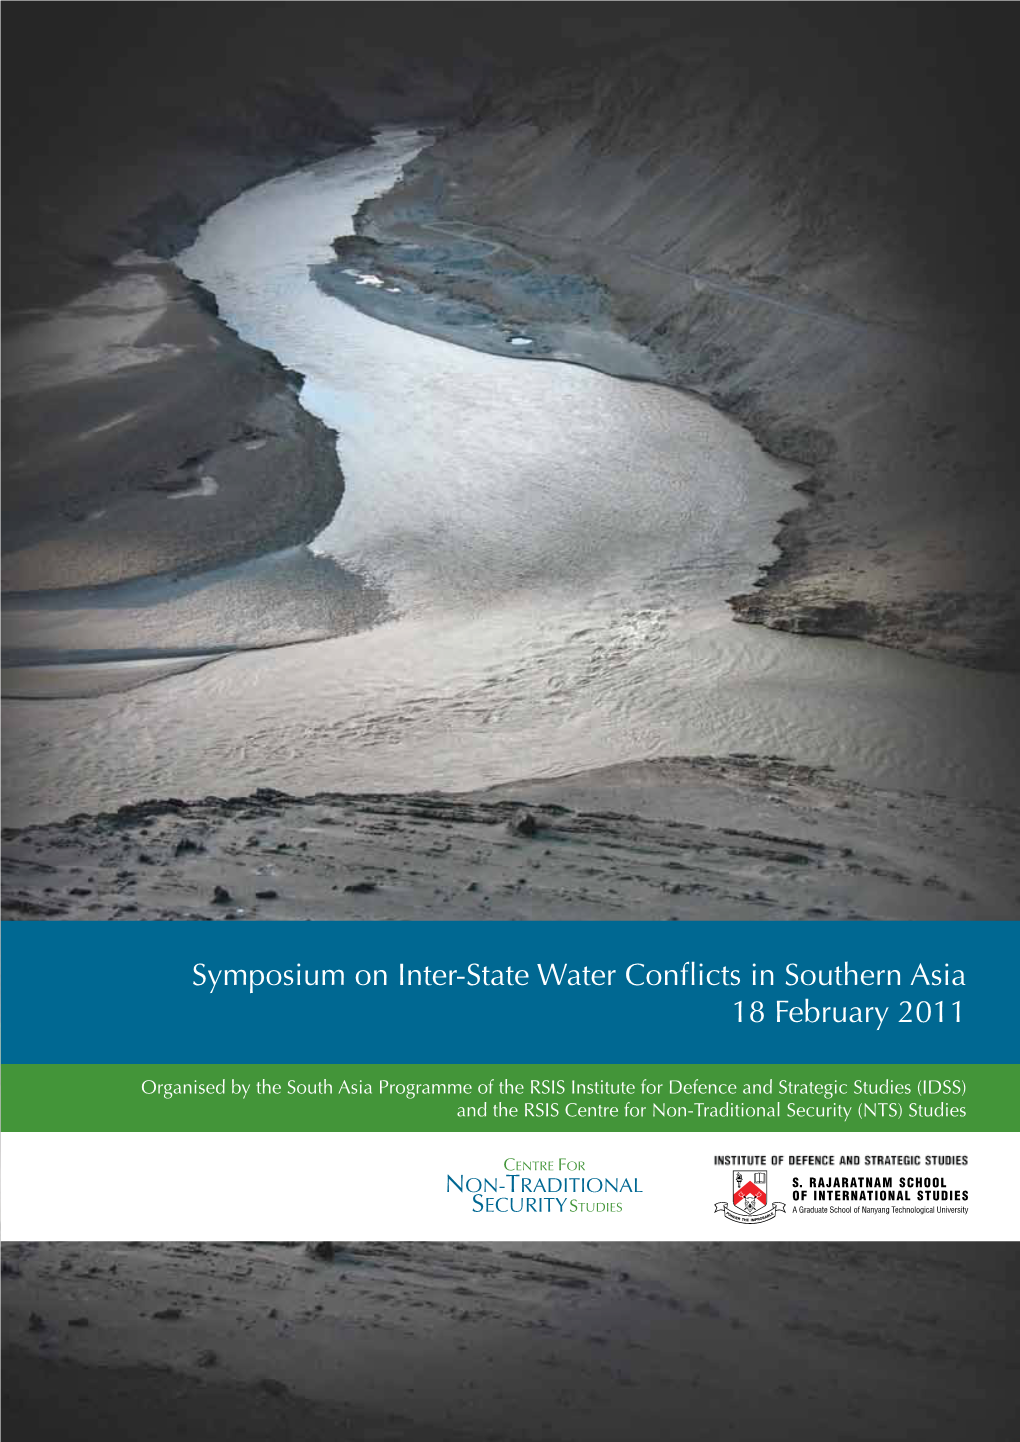 Inter-State Water Conflicts in Southern Asia 18 February 2011